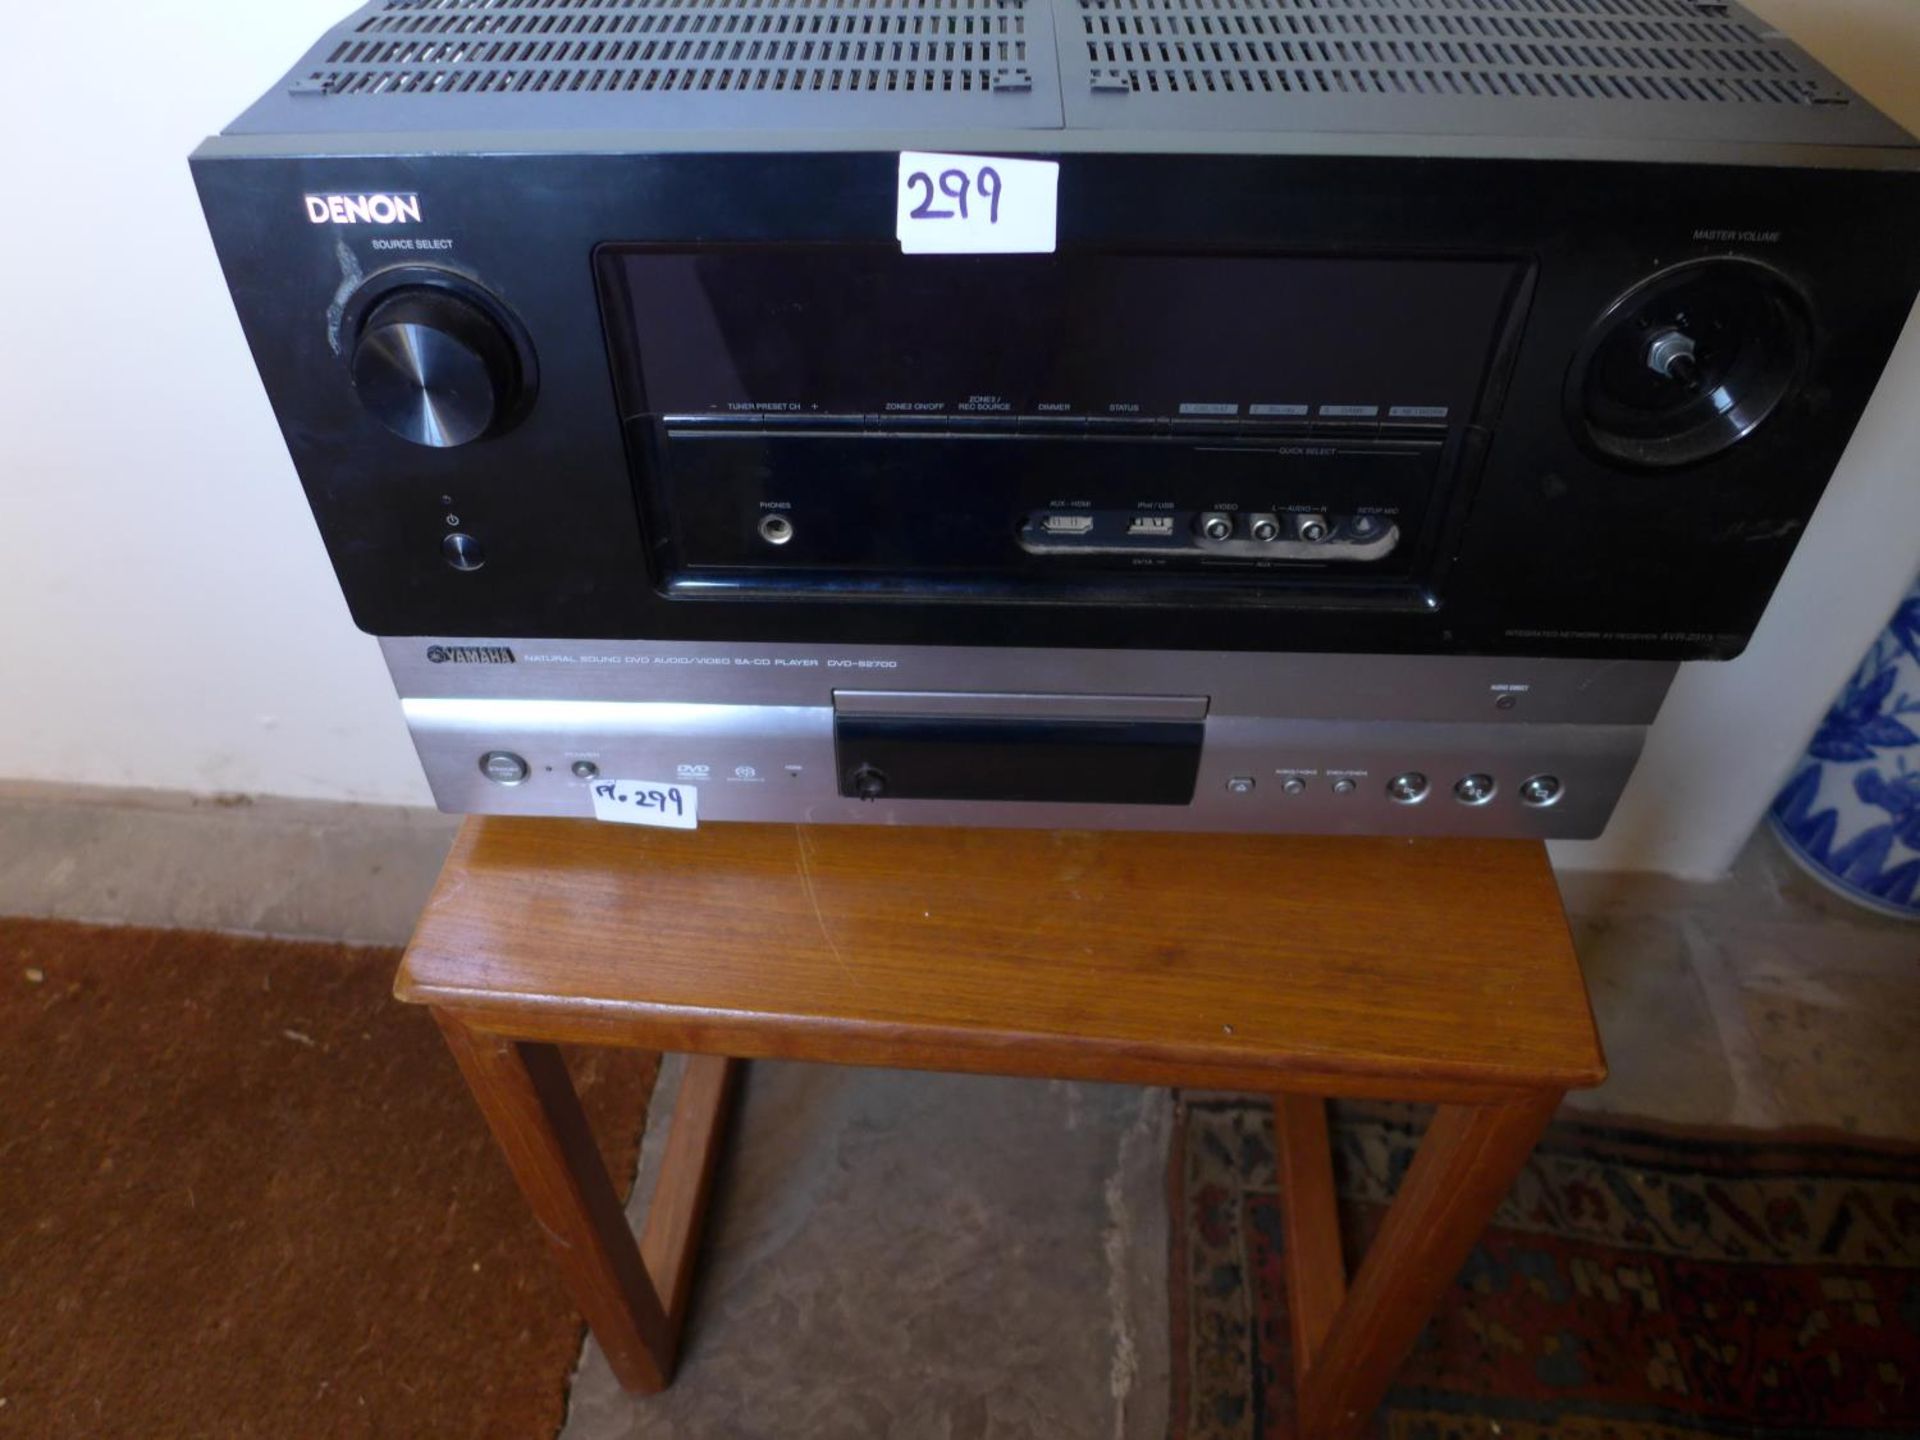 A DENON AVR - 2313 RECEIVER, POWER CABLE AND REMOTE CONTROL, YAMAHA AUDIO/VIDEO SA - CD PLAYER,